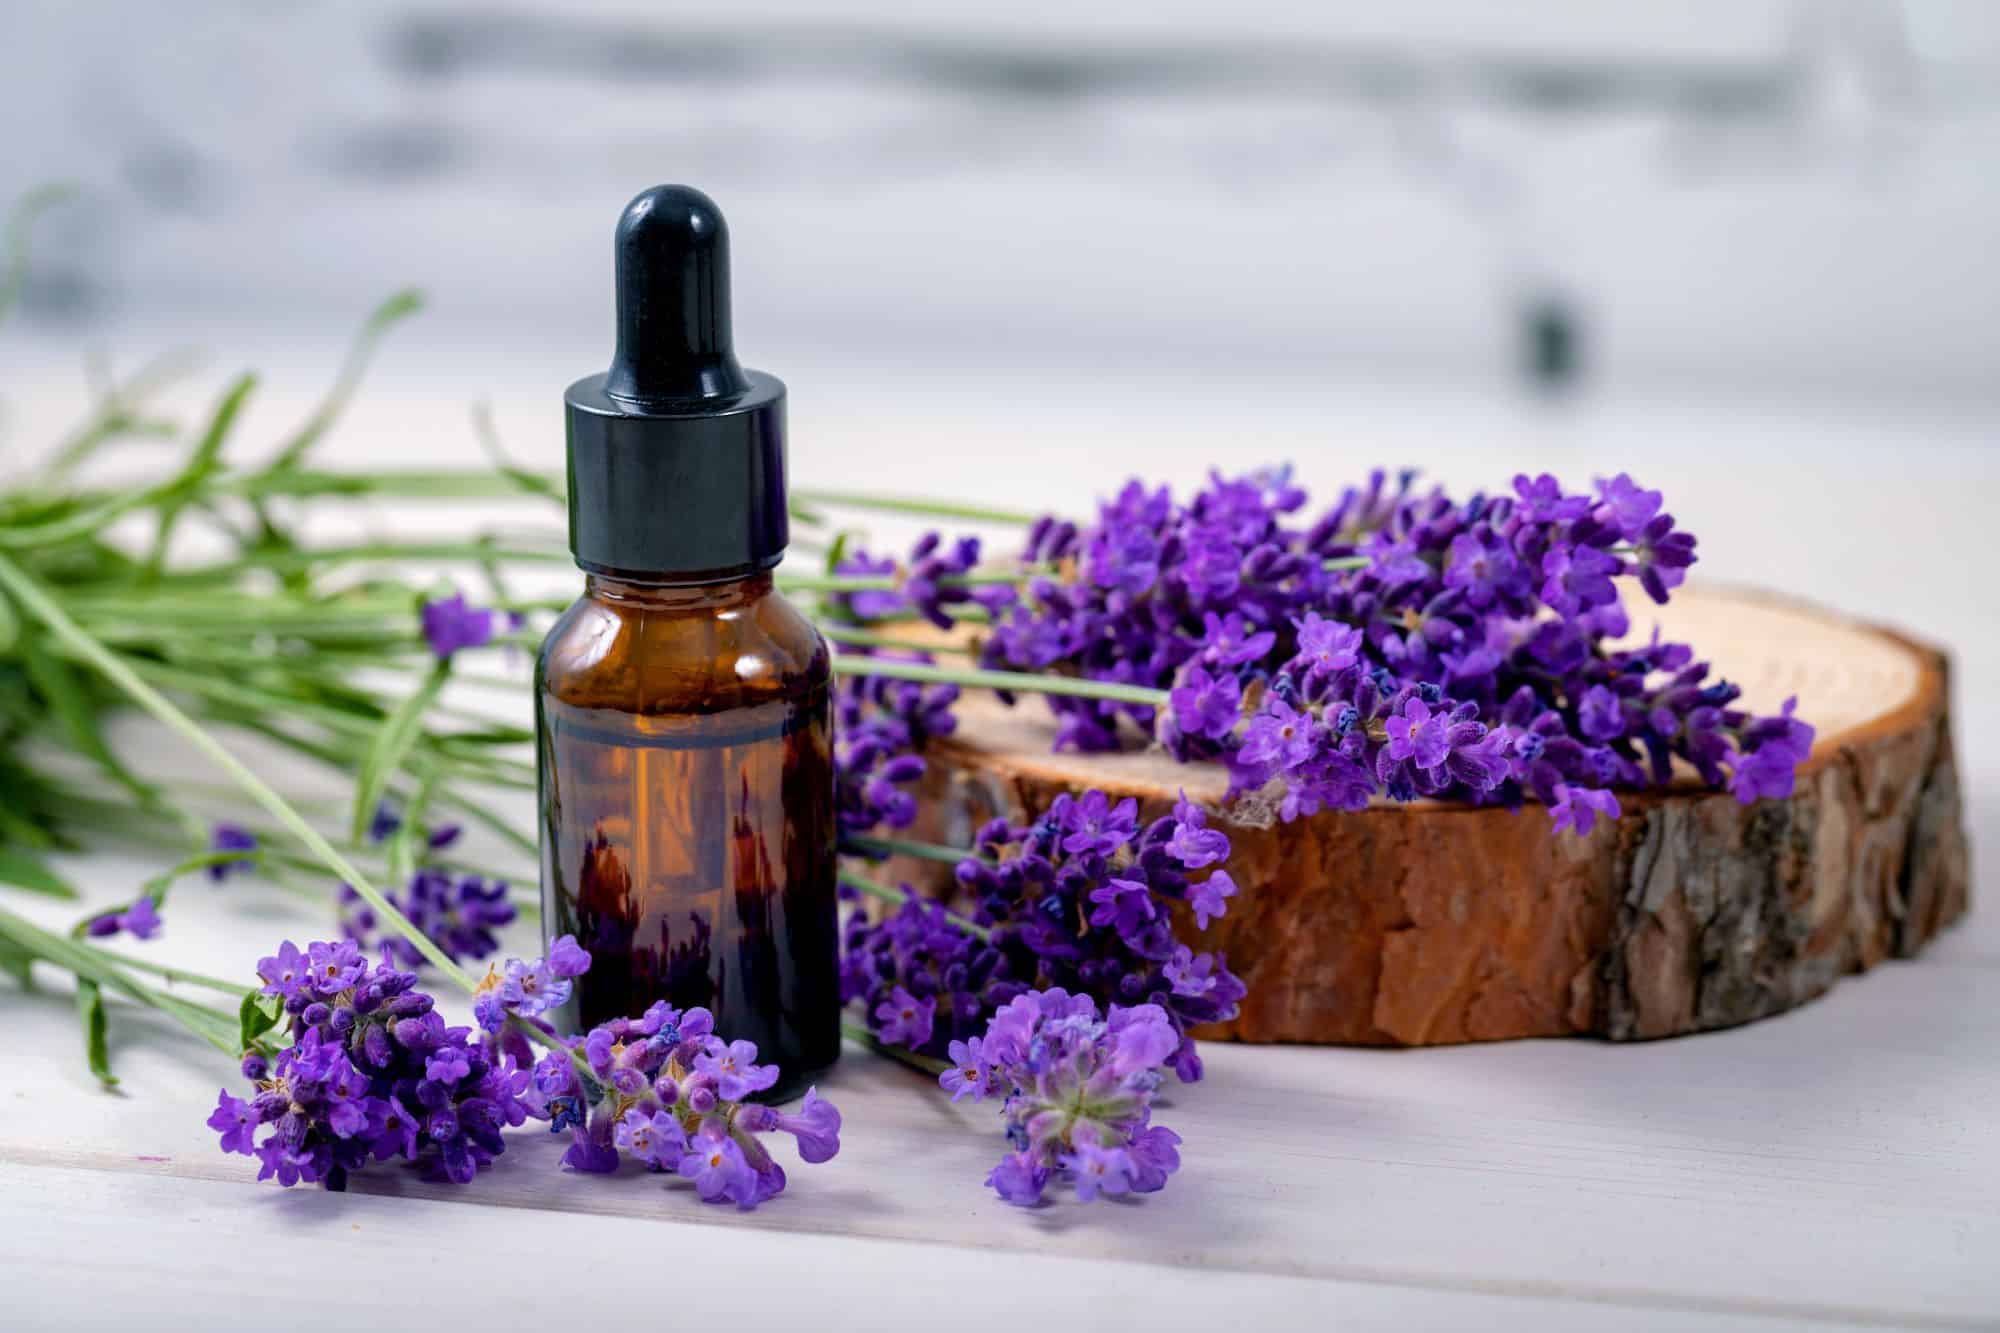 lavender flowers are used to make lavender essential oil